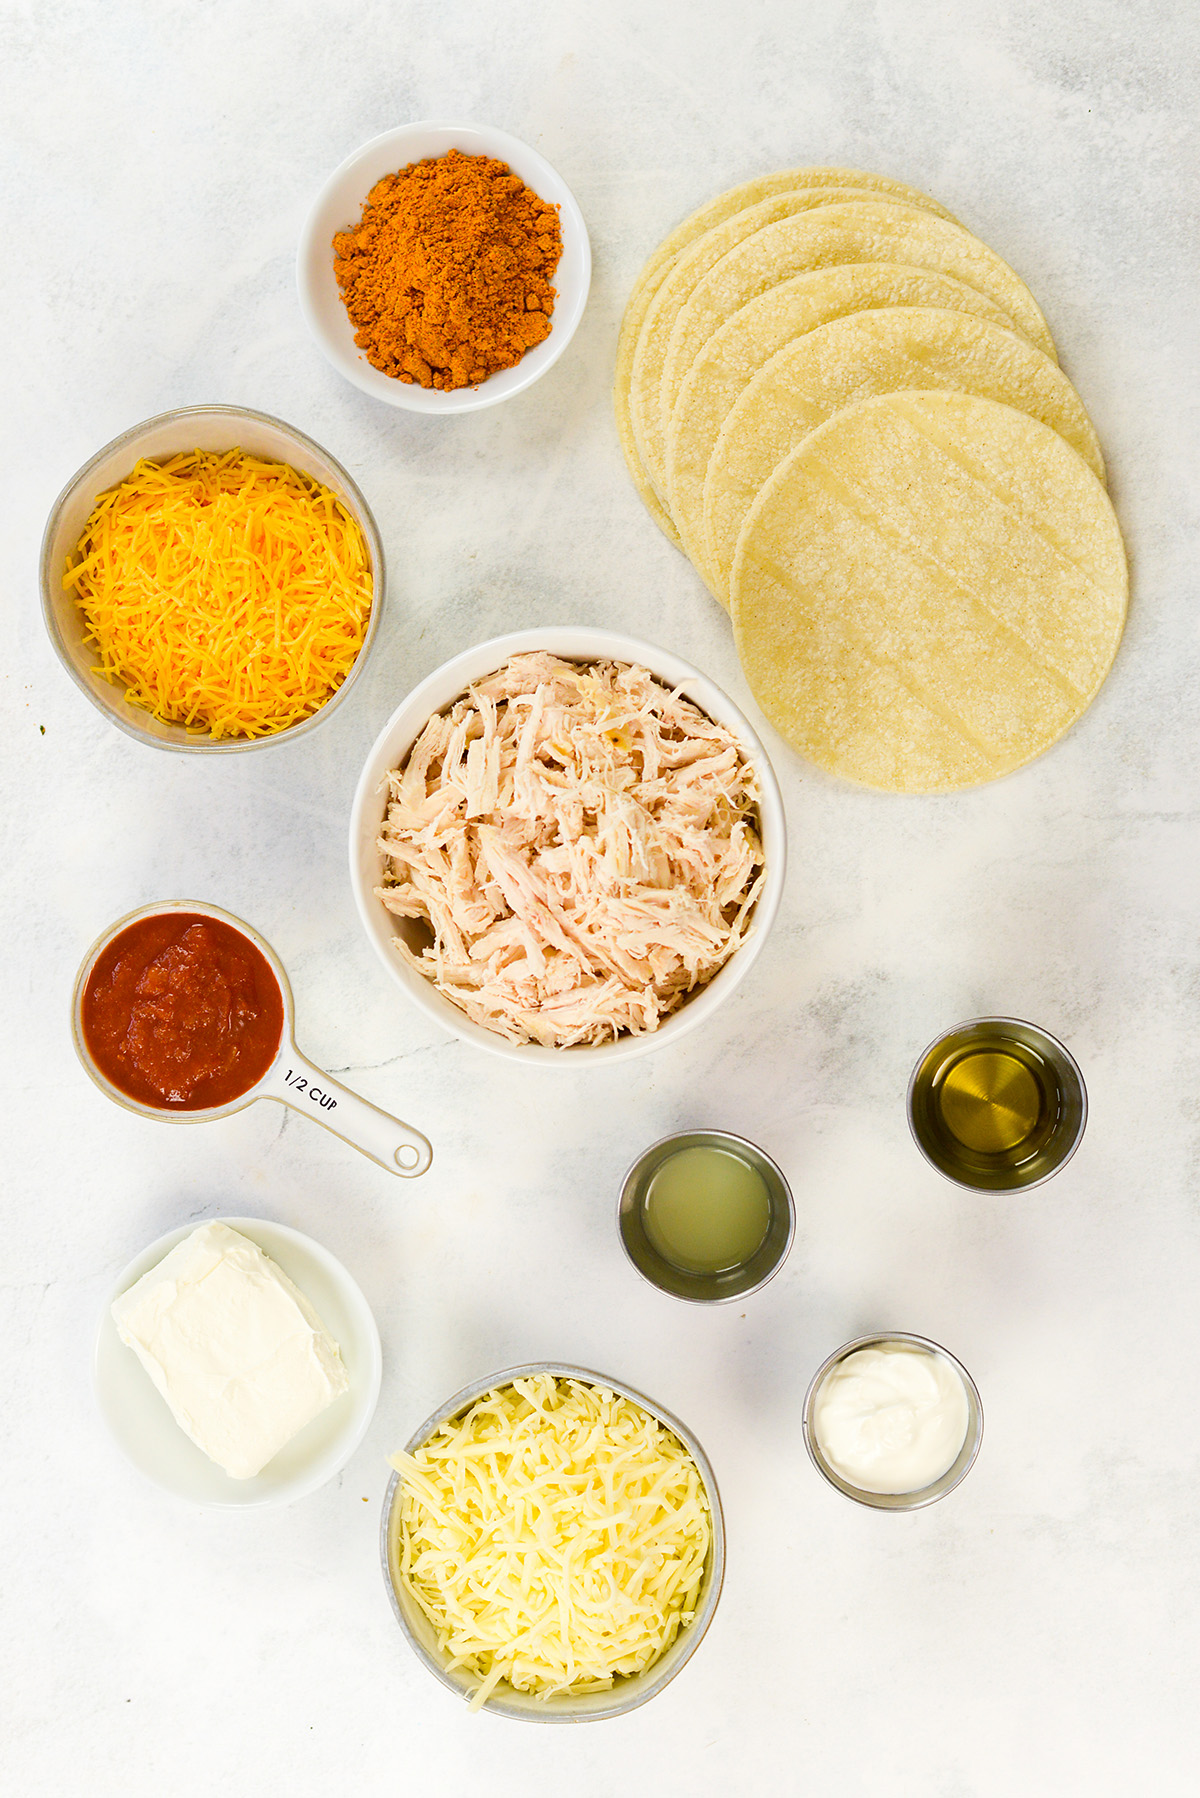 Ingredients for chicken taquitos spread on a white countertop.